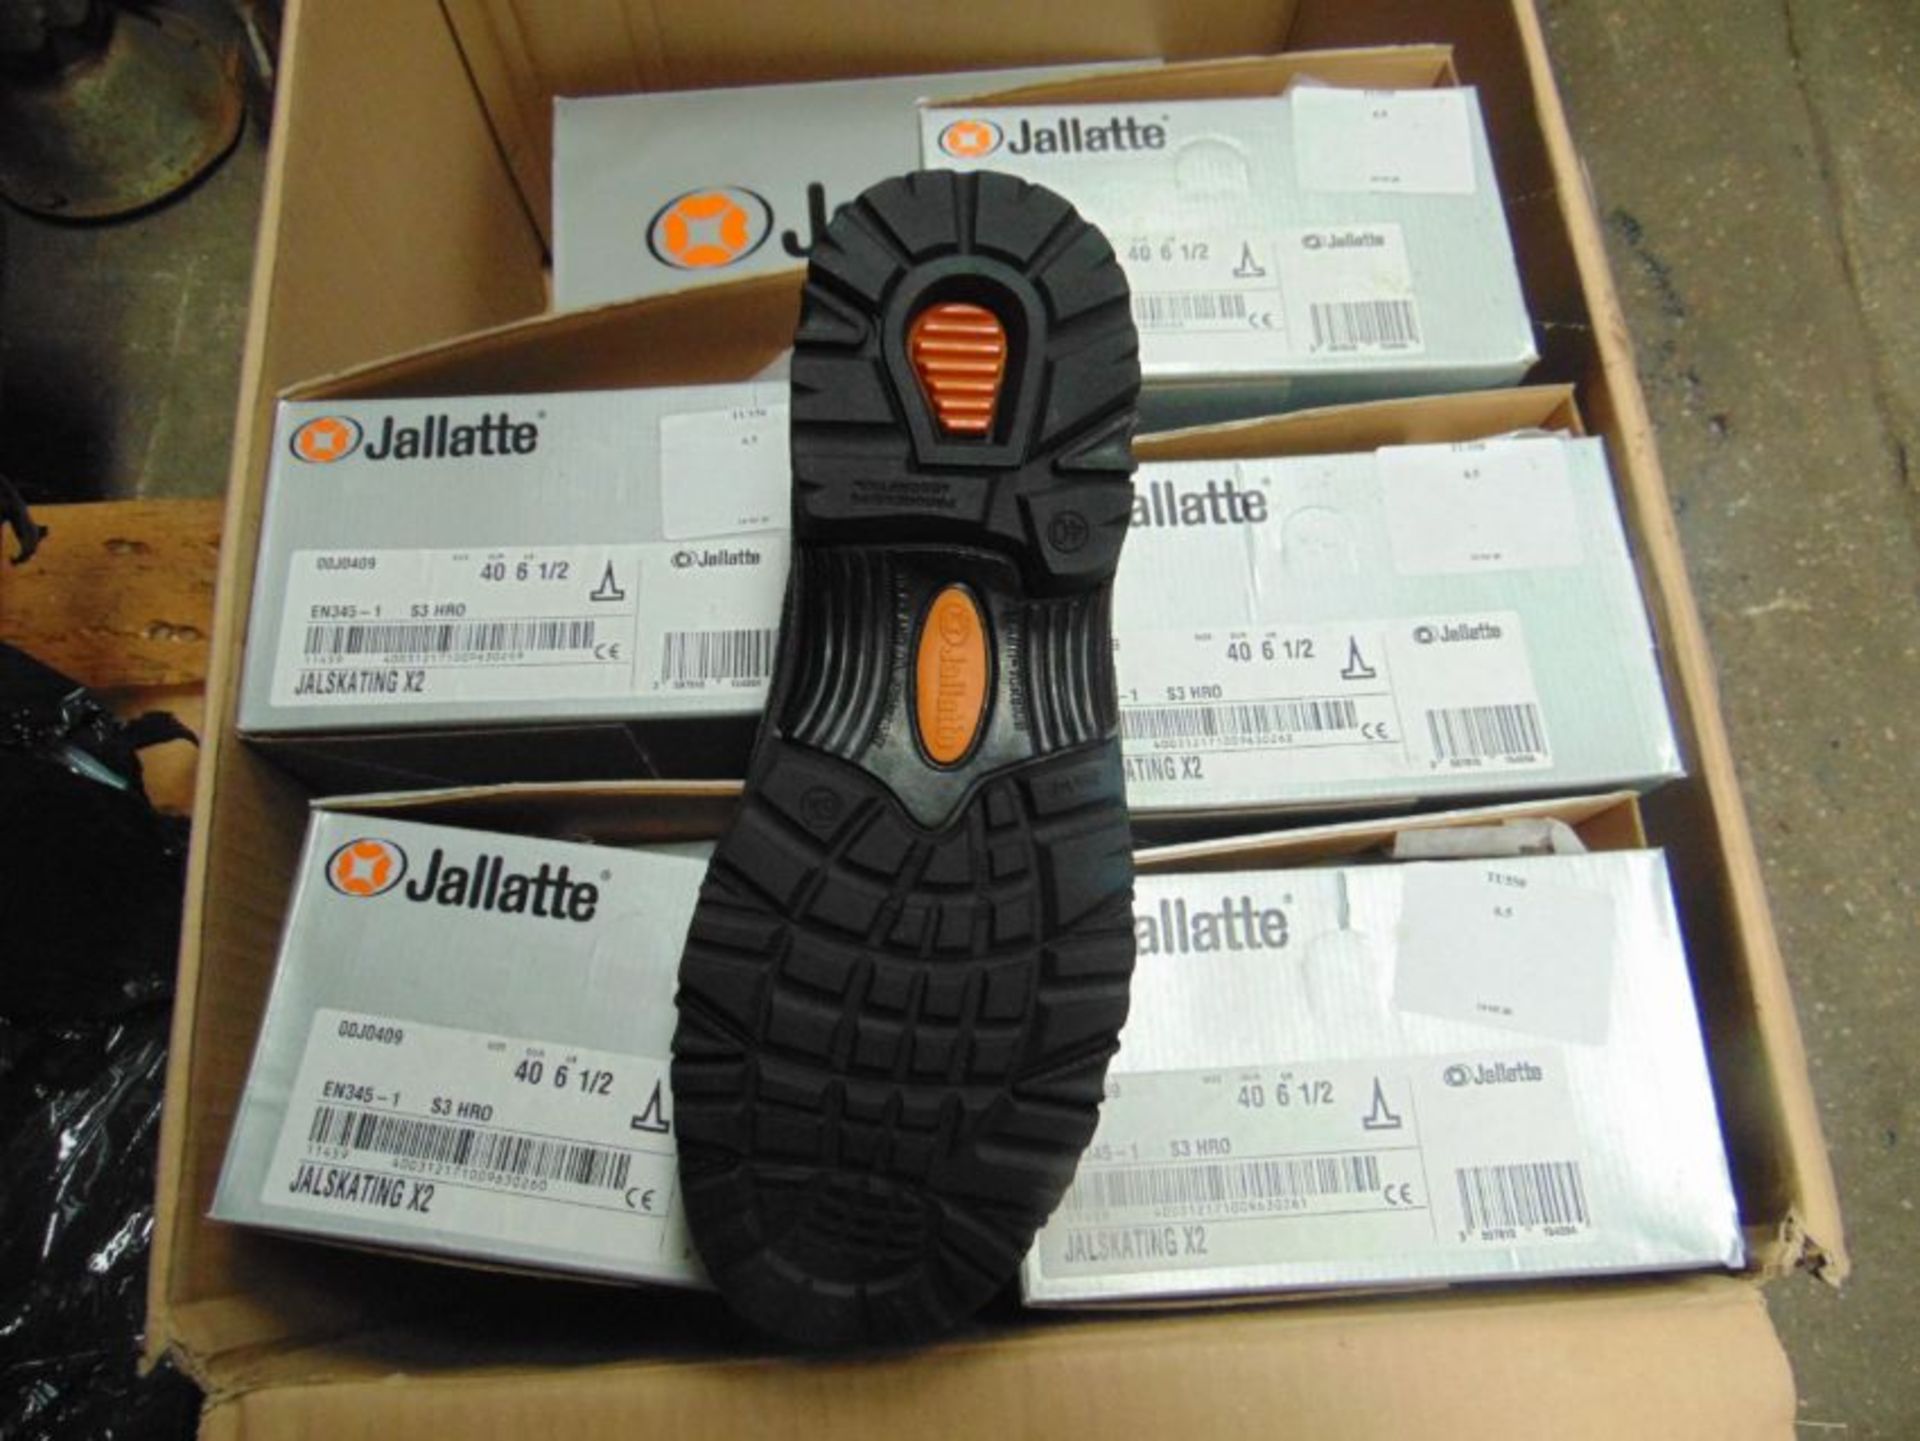 6 x Pairs of Jallatte Boots Unissued - Image 3 of 5